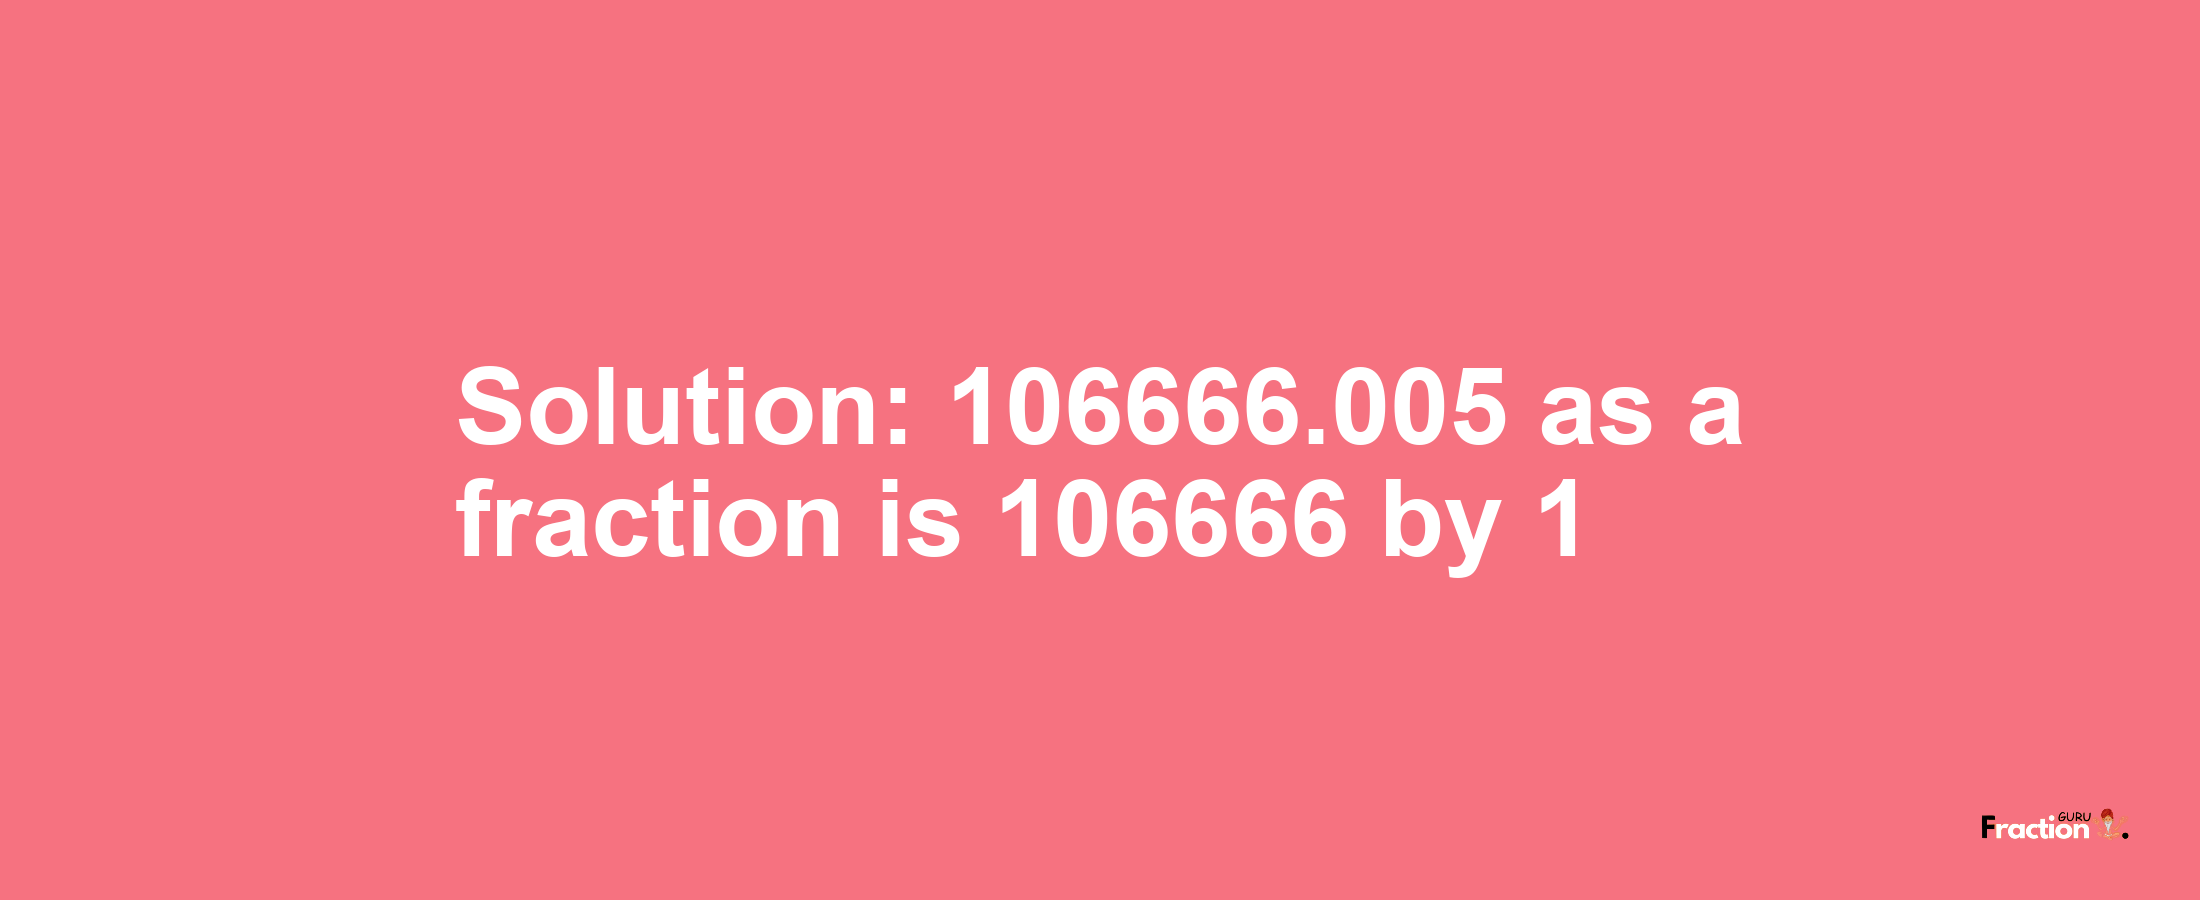 Solution:106666.005 as a fraction is 106666/1